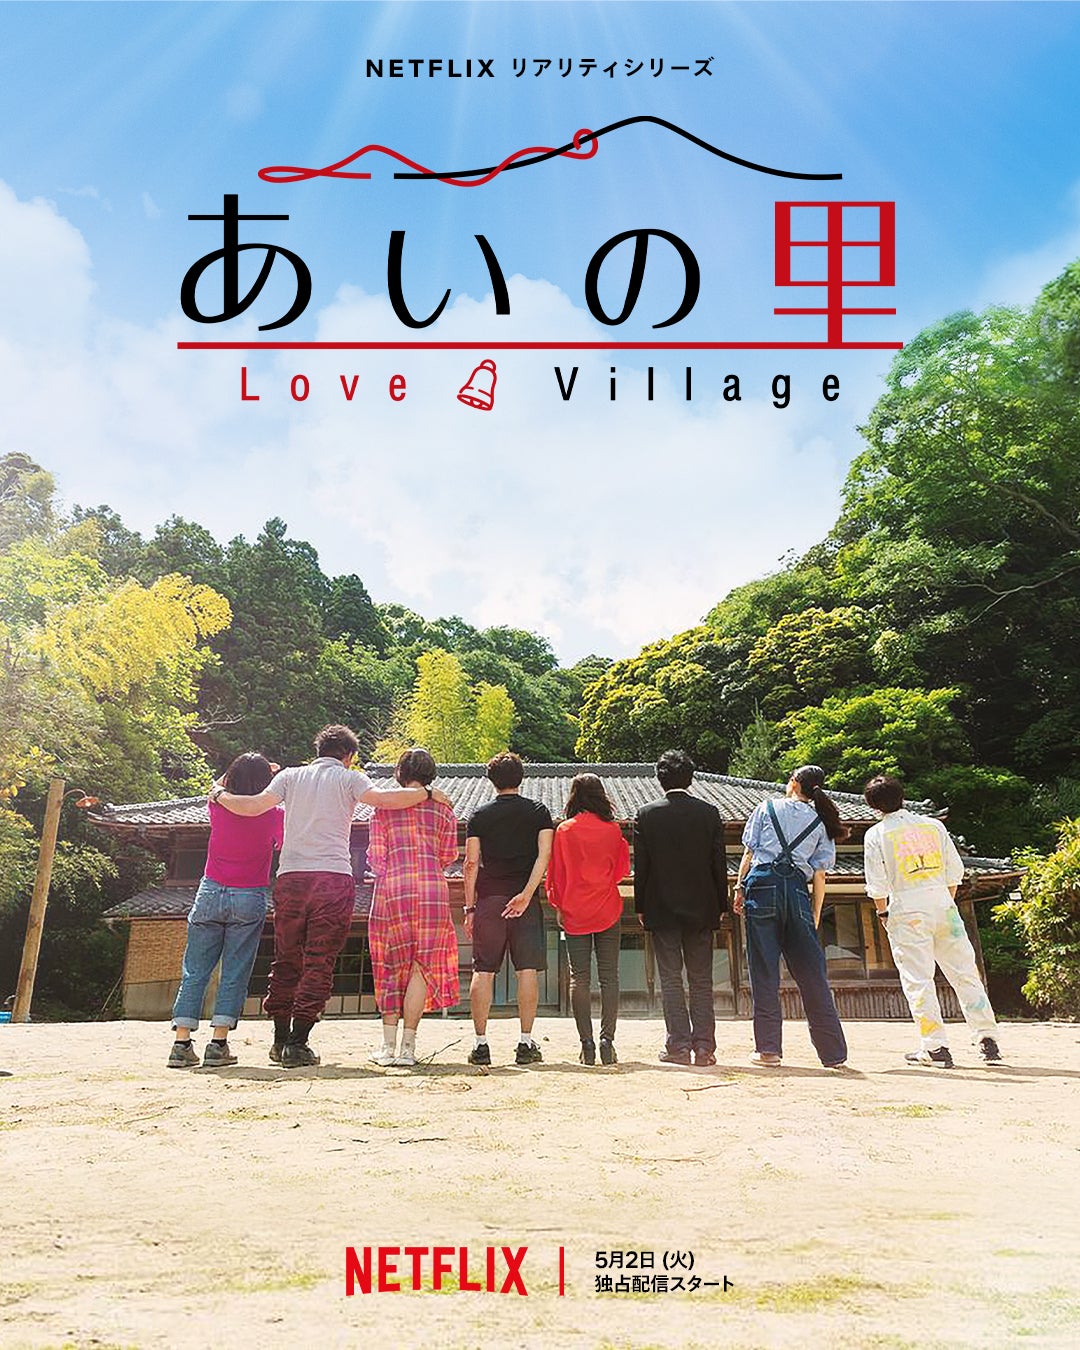 TV ratings for Love Village (あいの里) in France. Netflix TV series